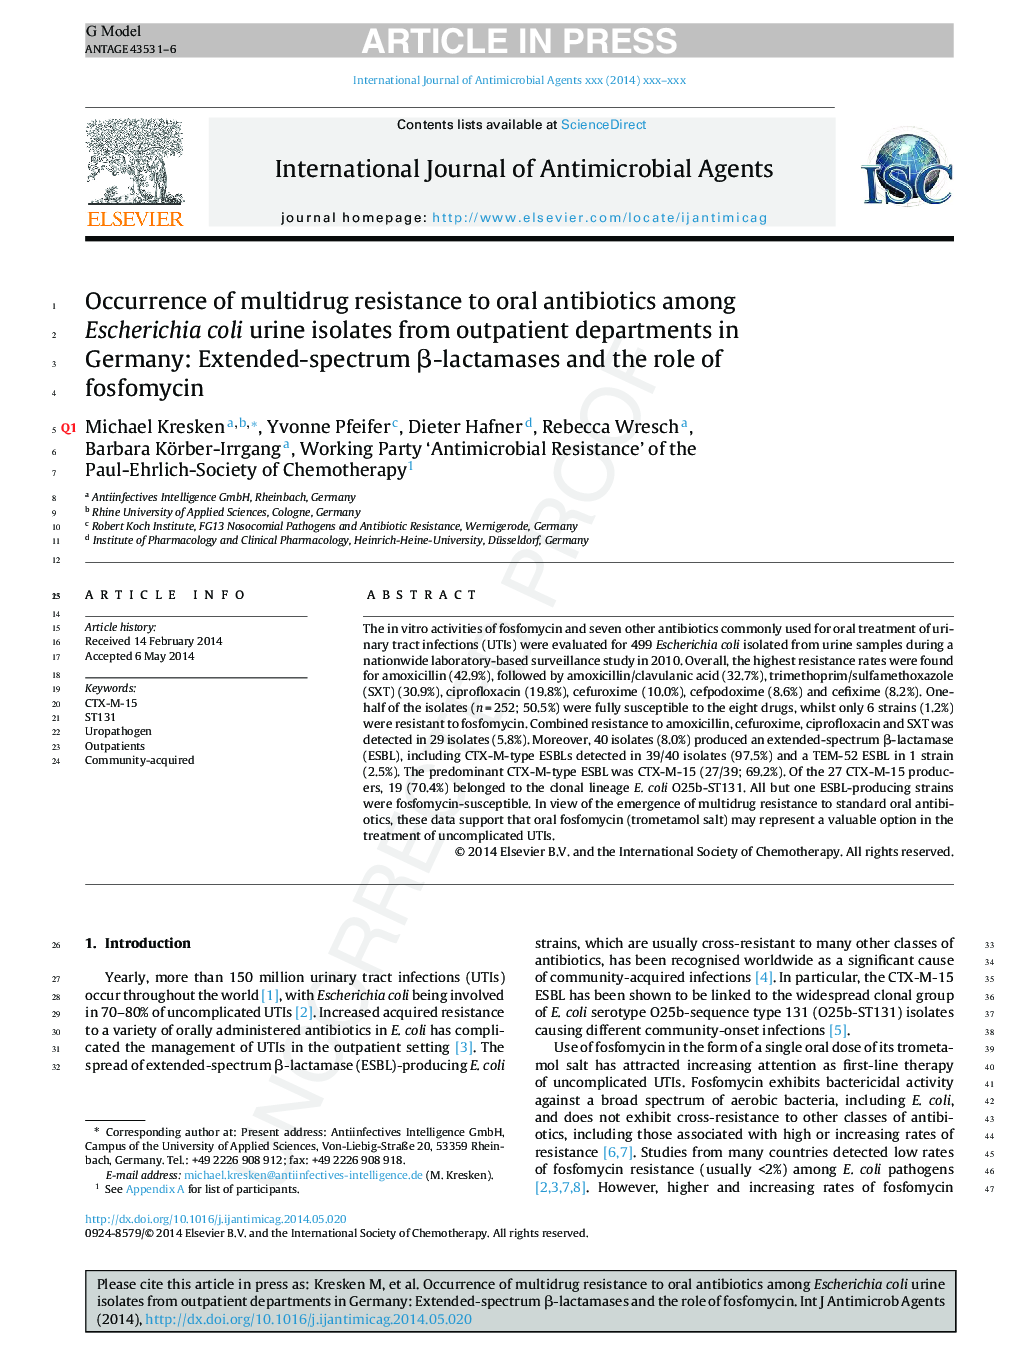 Occurrence of multidrug resistance to oral antibiotics among Escherichia coli urine isolates from outpatient departments in Germany: Extended-spectrum Î²-lactamases and the role of fosfomycin